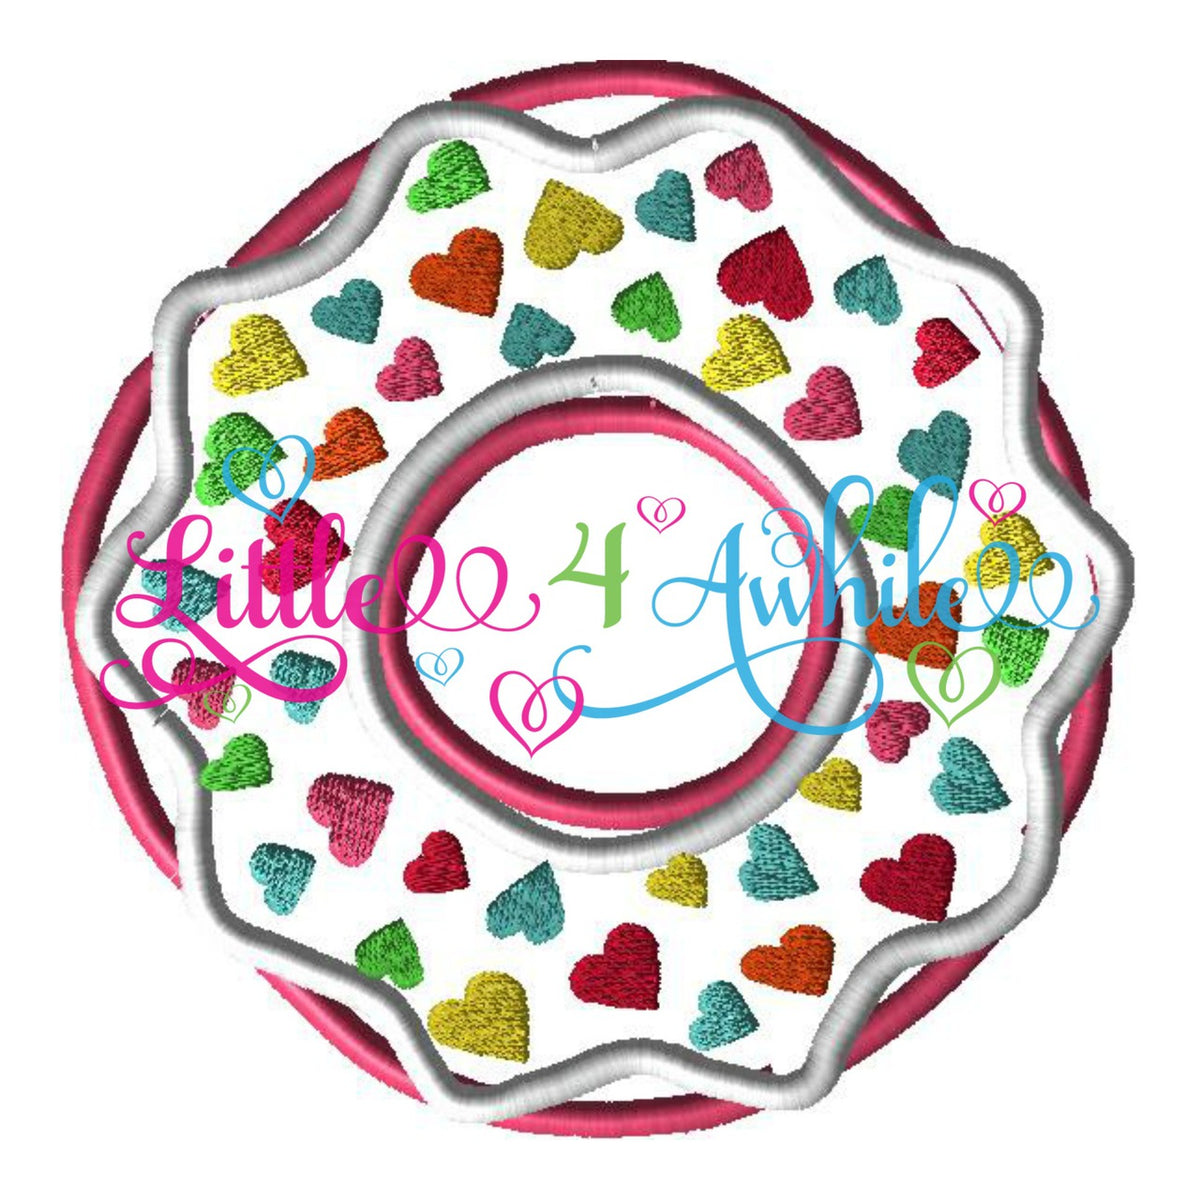 Yummy Donut Sweets Applique Embroidery Design - Ellie and Mac, Digital (PDF) Sewing Patterns | USA, Canada, UK, Australia